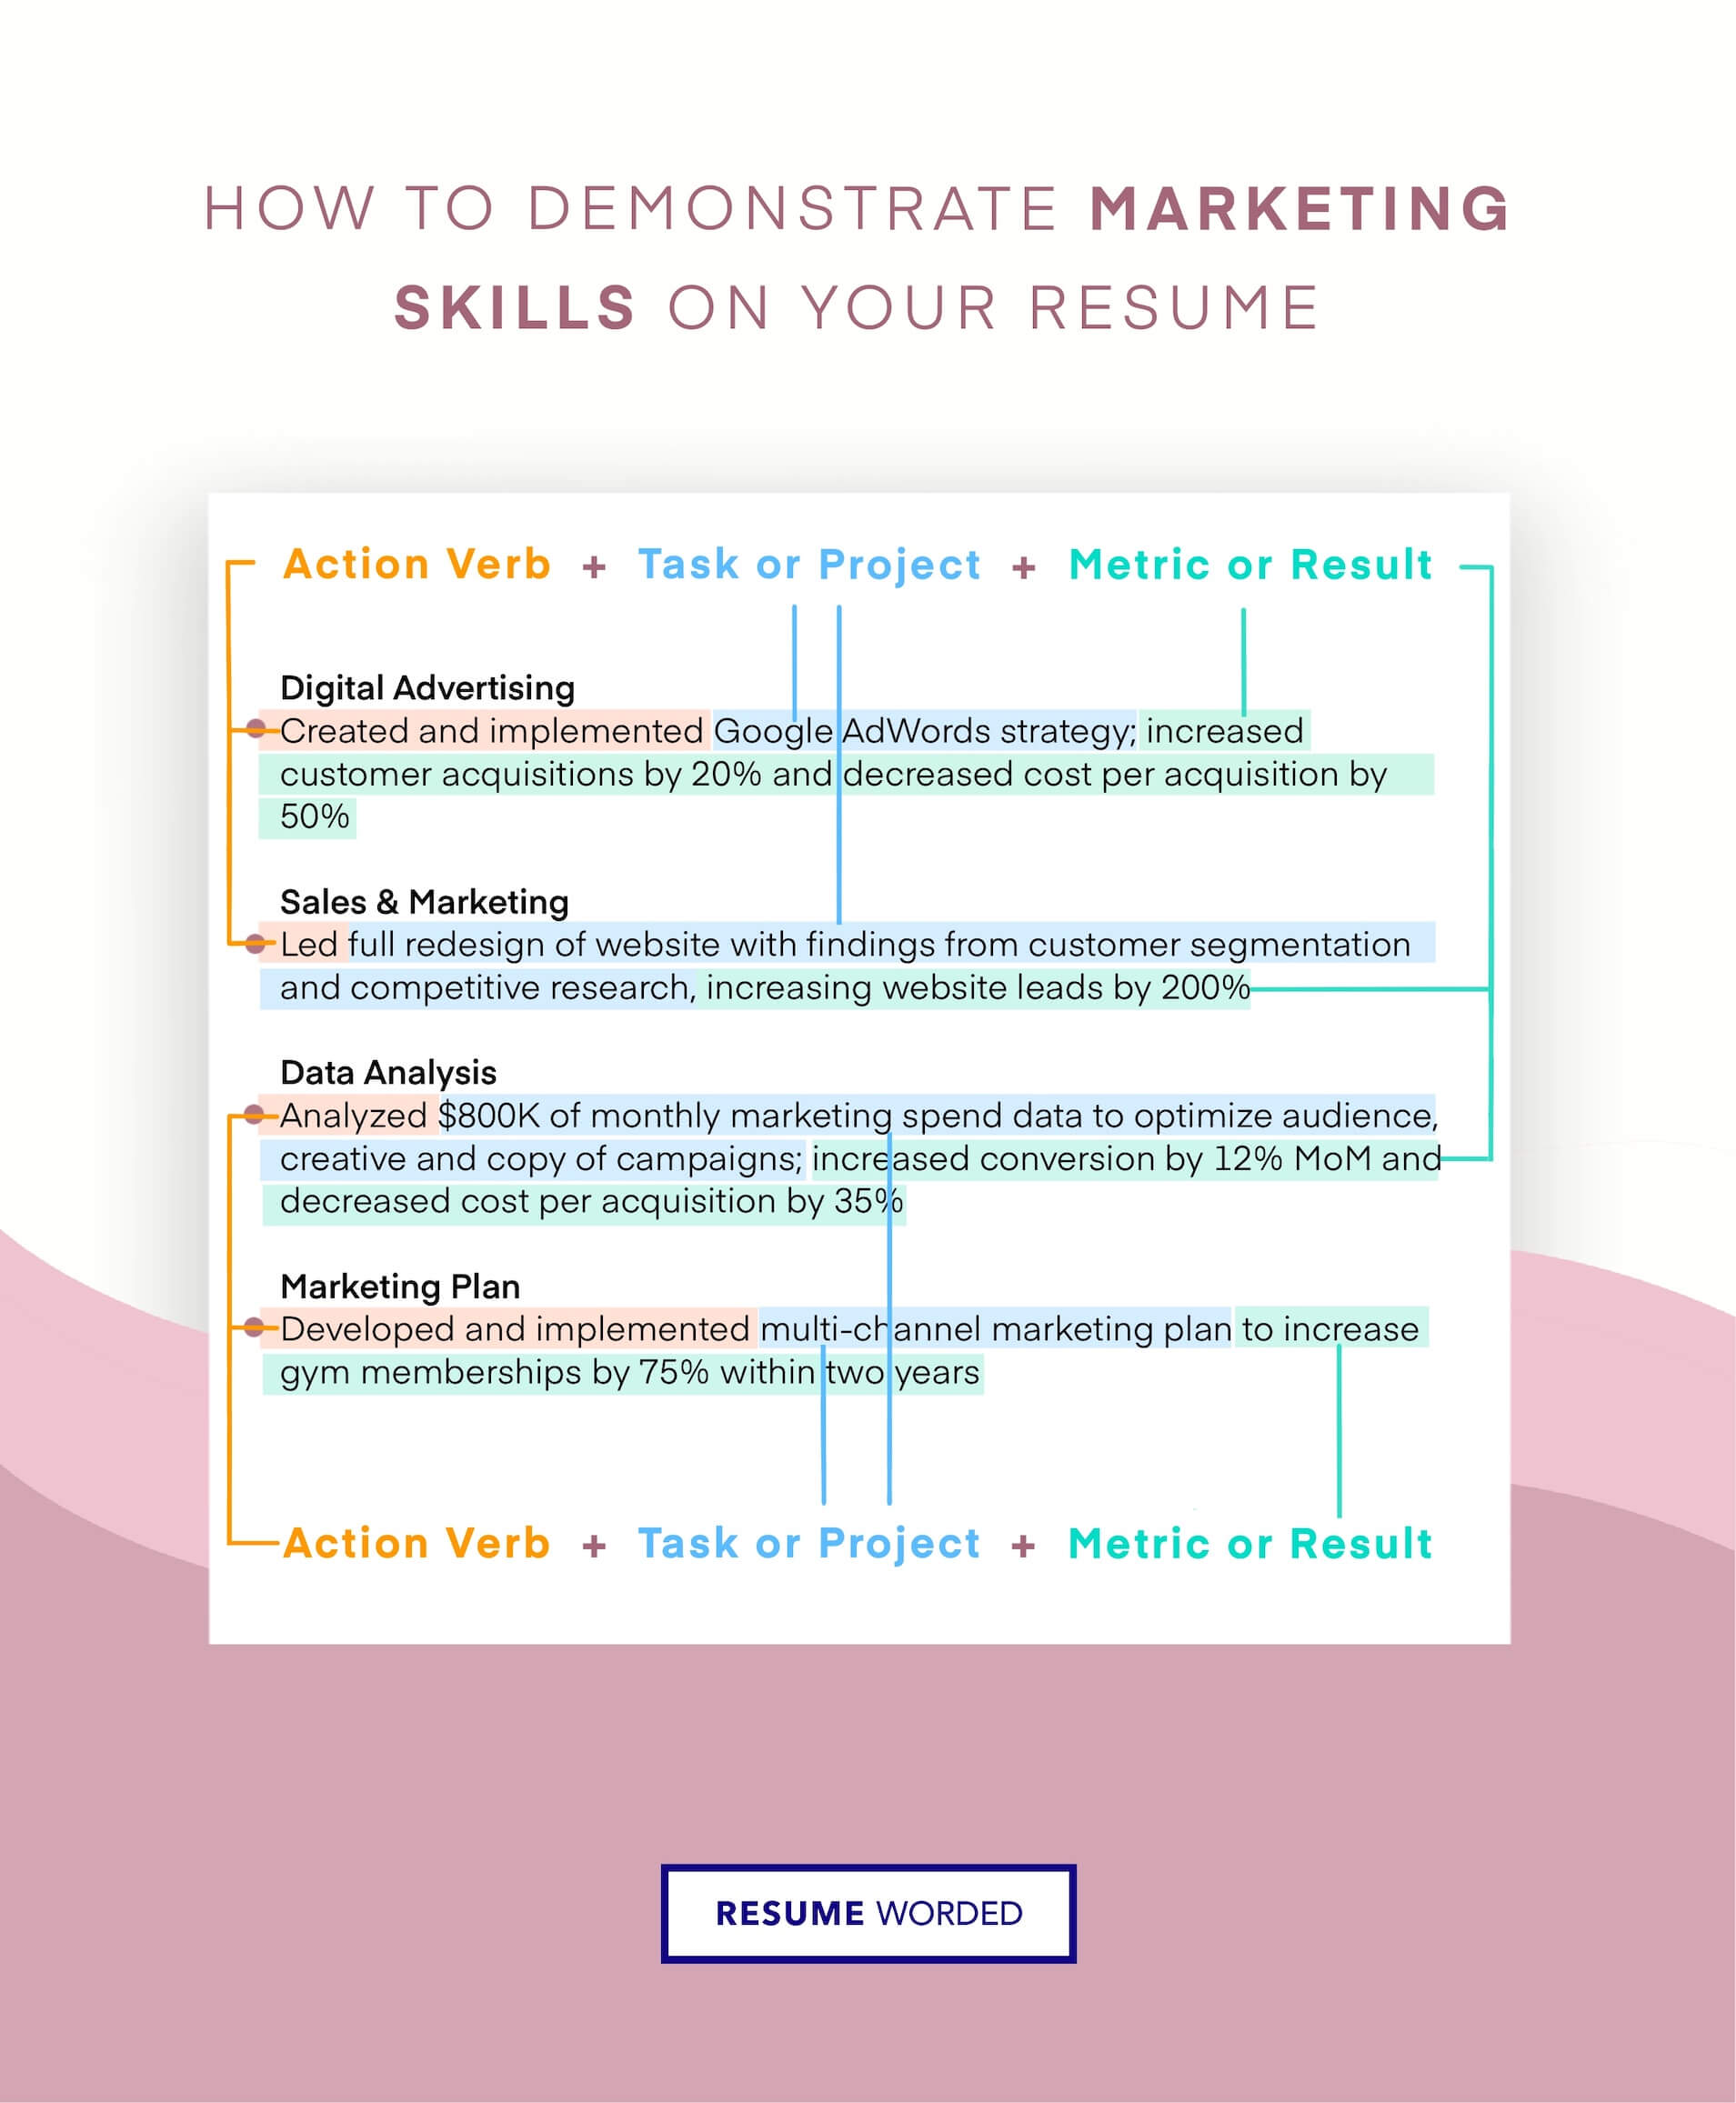 Uses marketing-focused action verbs to describe achievements - Marketing Director Resume